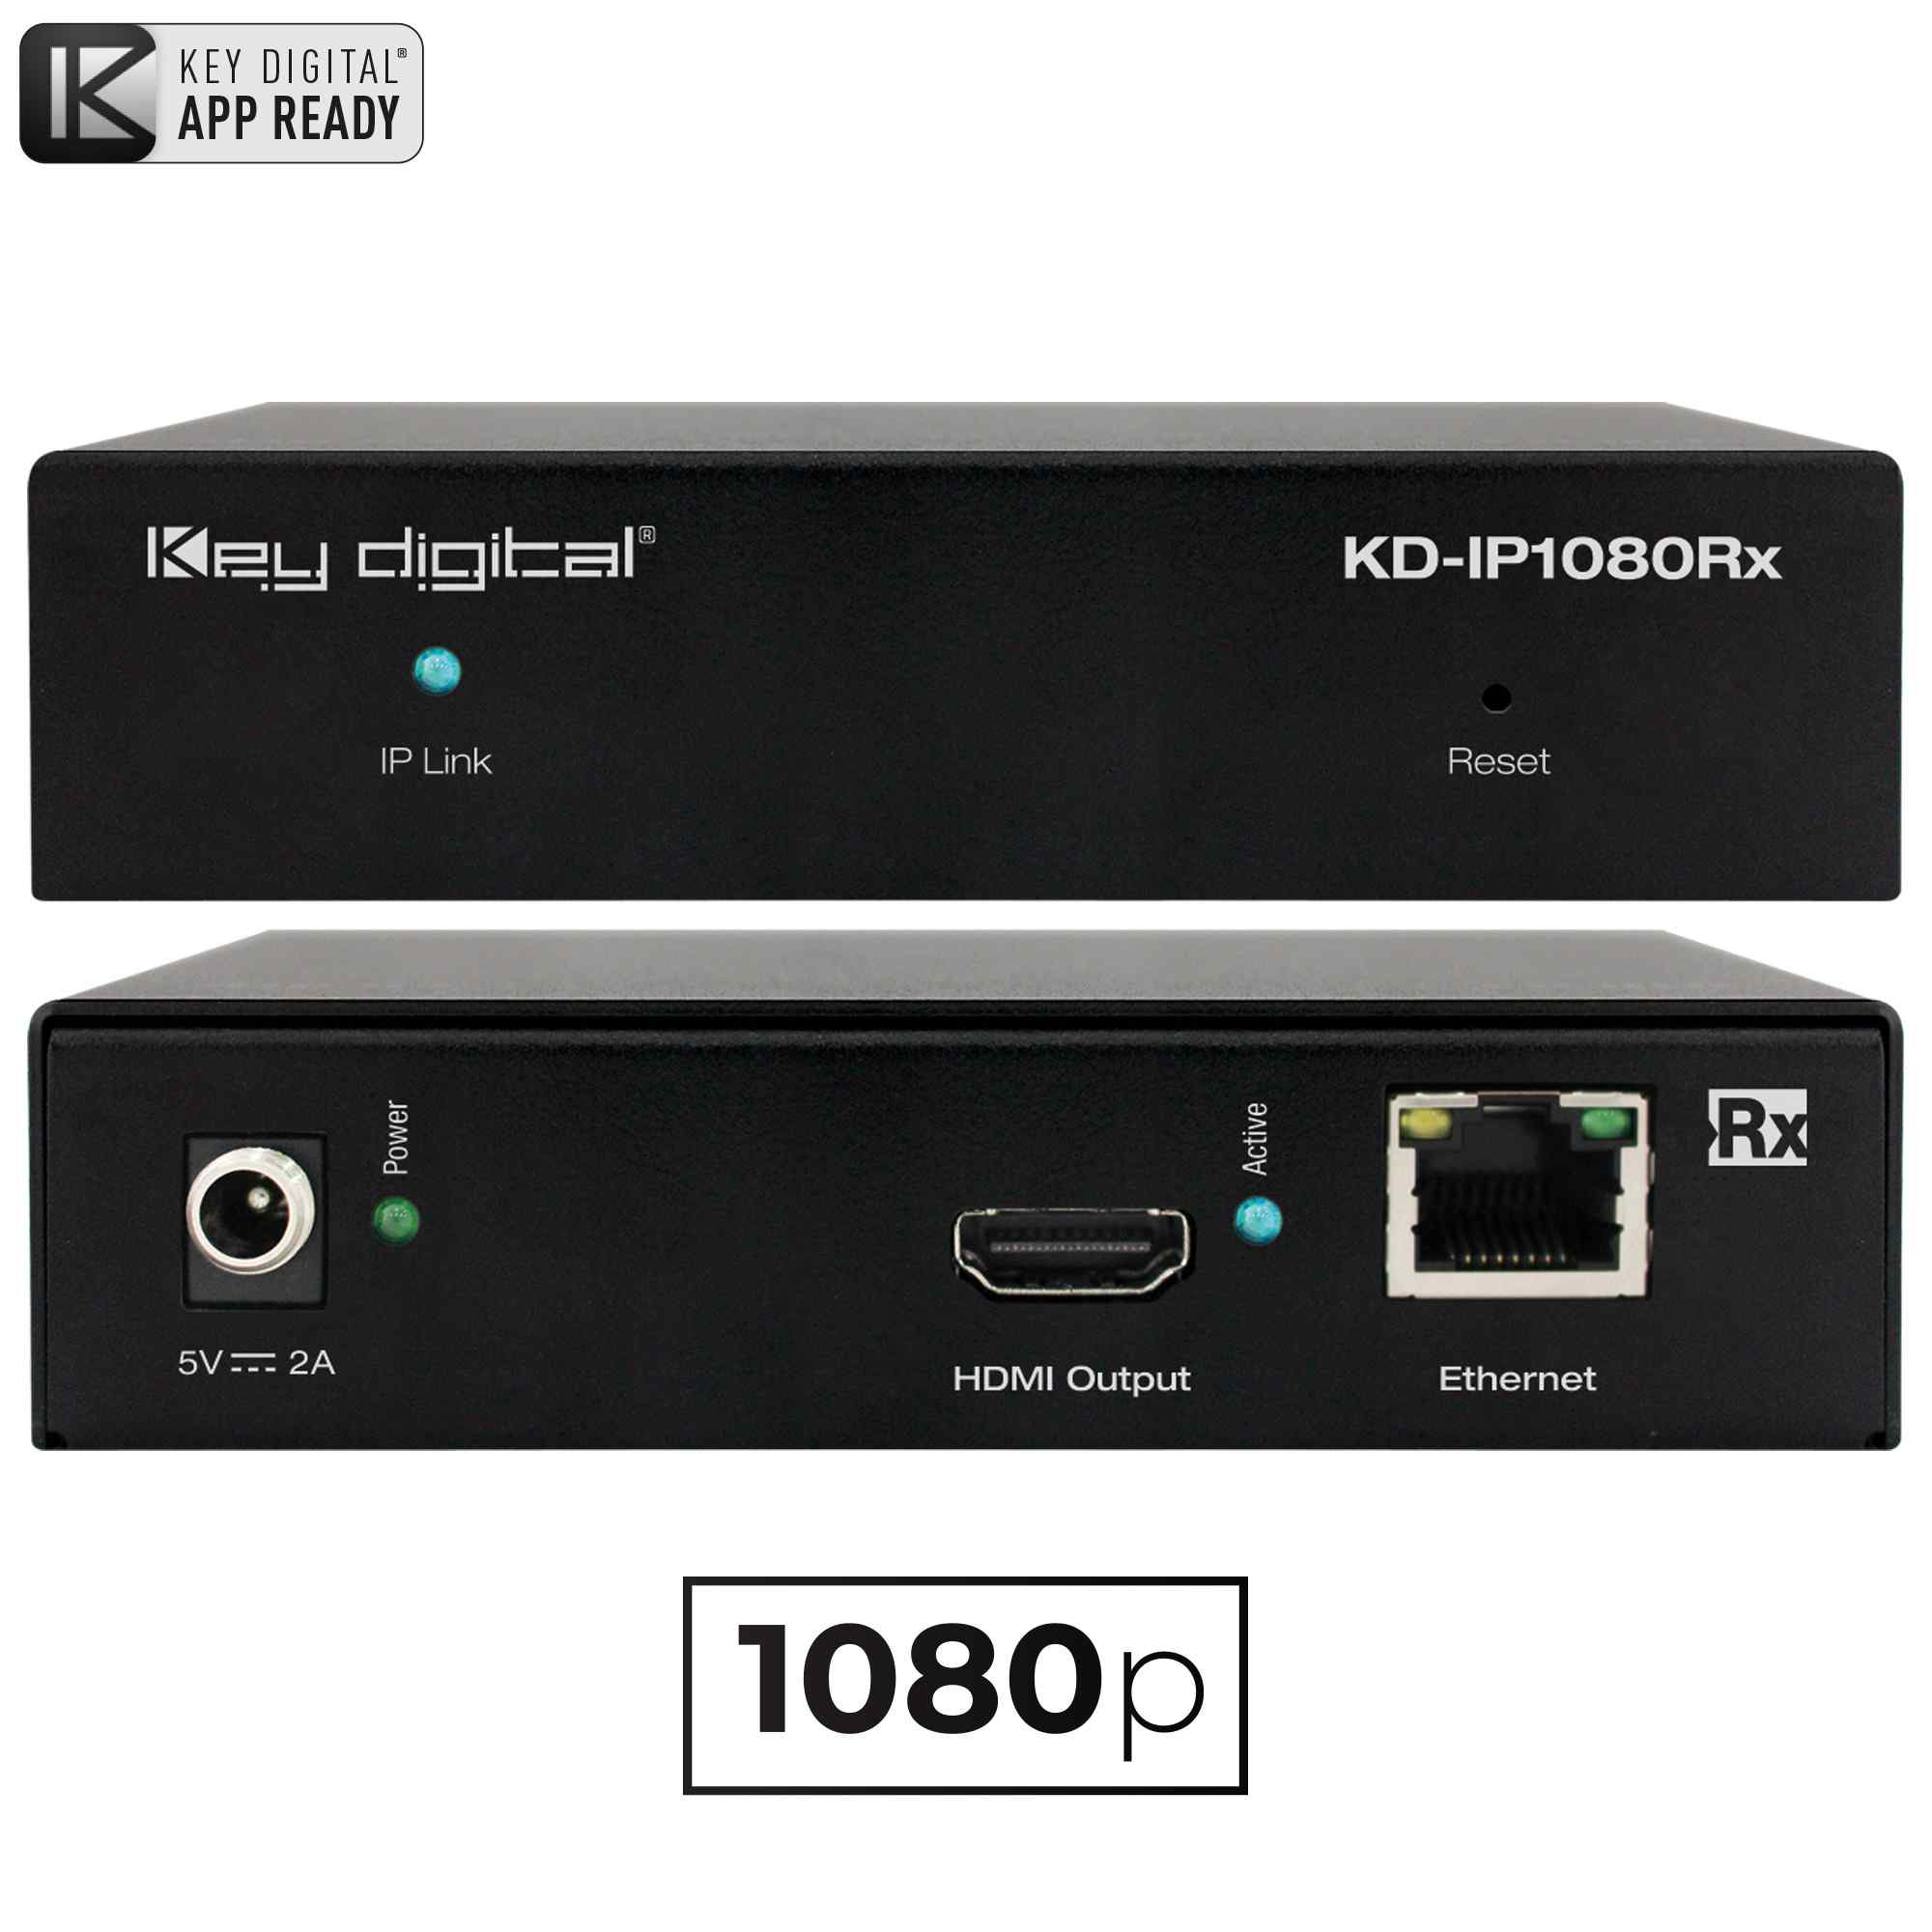 Thumbnail of Key Digital HDMI over IP front and rear view